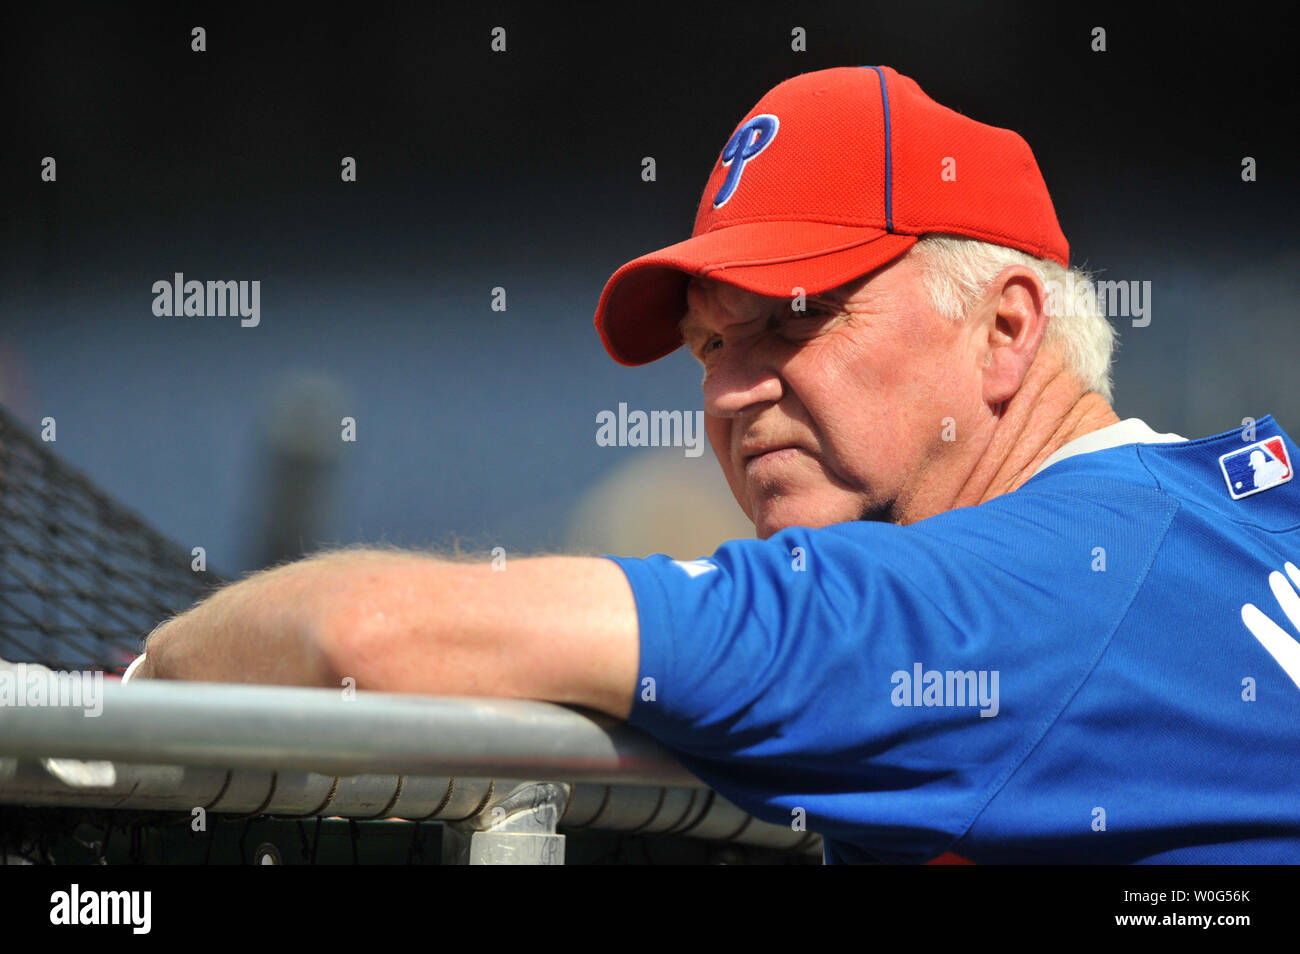 Former Phillies manager Charlie Manuel has 'made progress' after suffering  stroke – NBC10 Philadelphia